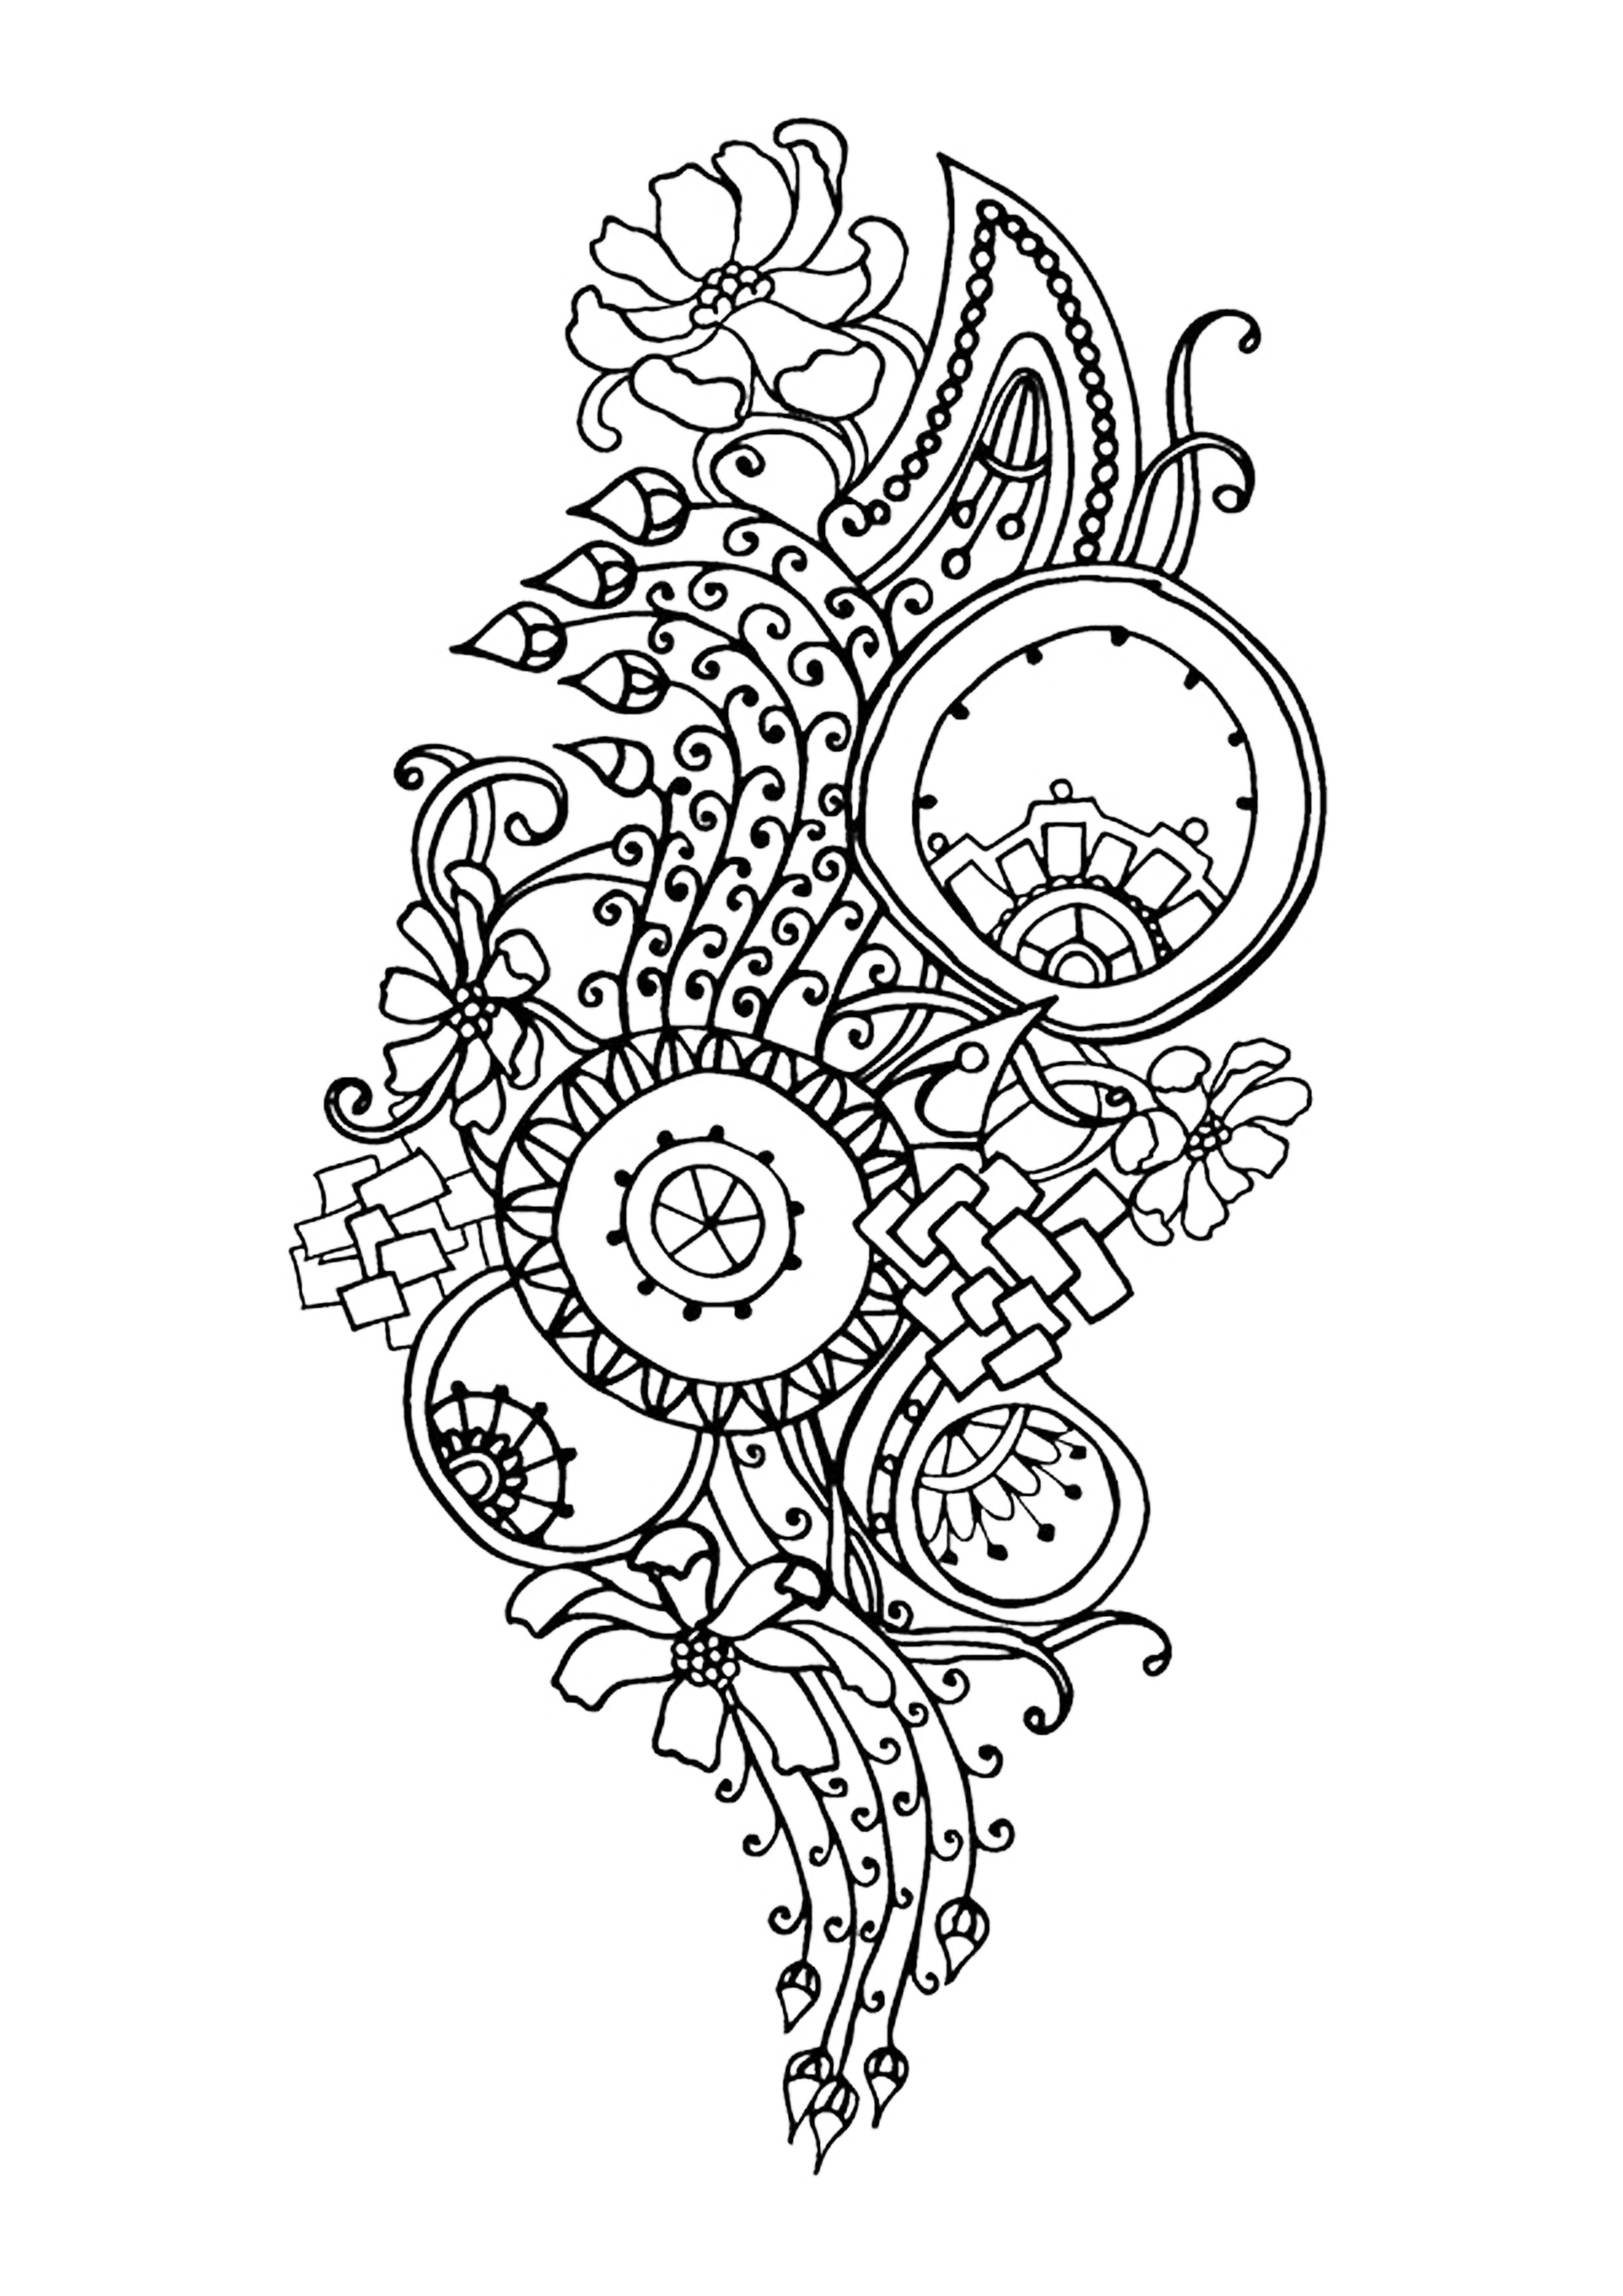 flower-vases-coloring-pages-flower-coloring-pages-for-adults-waldo